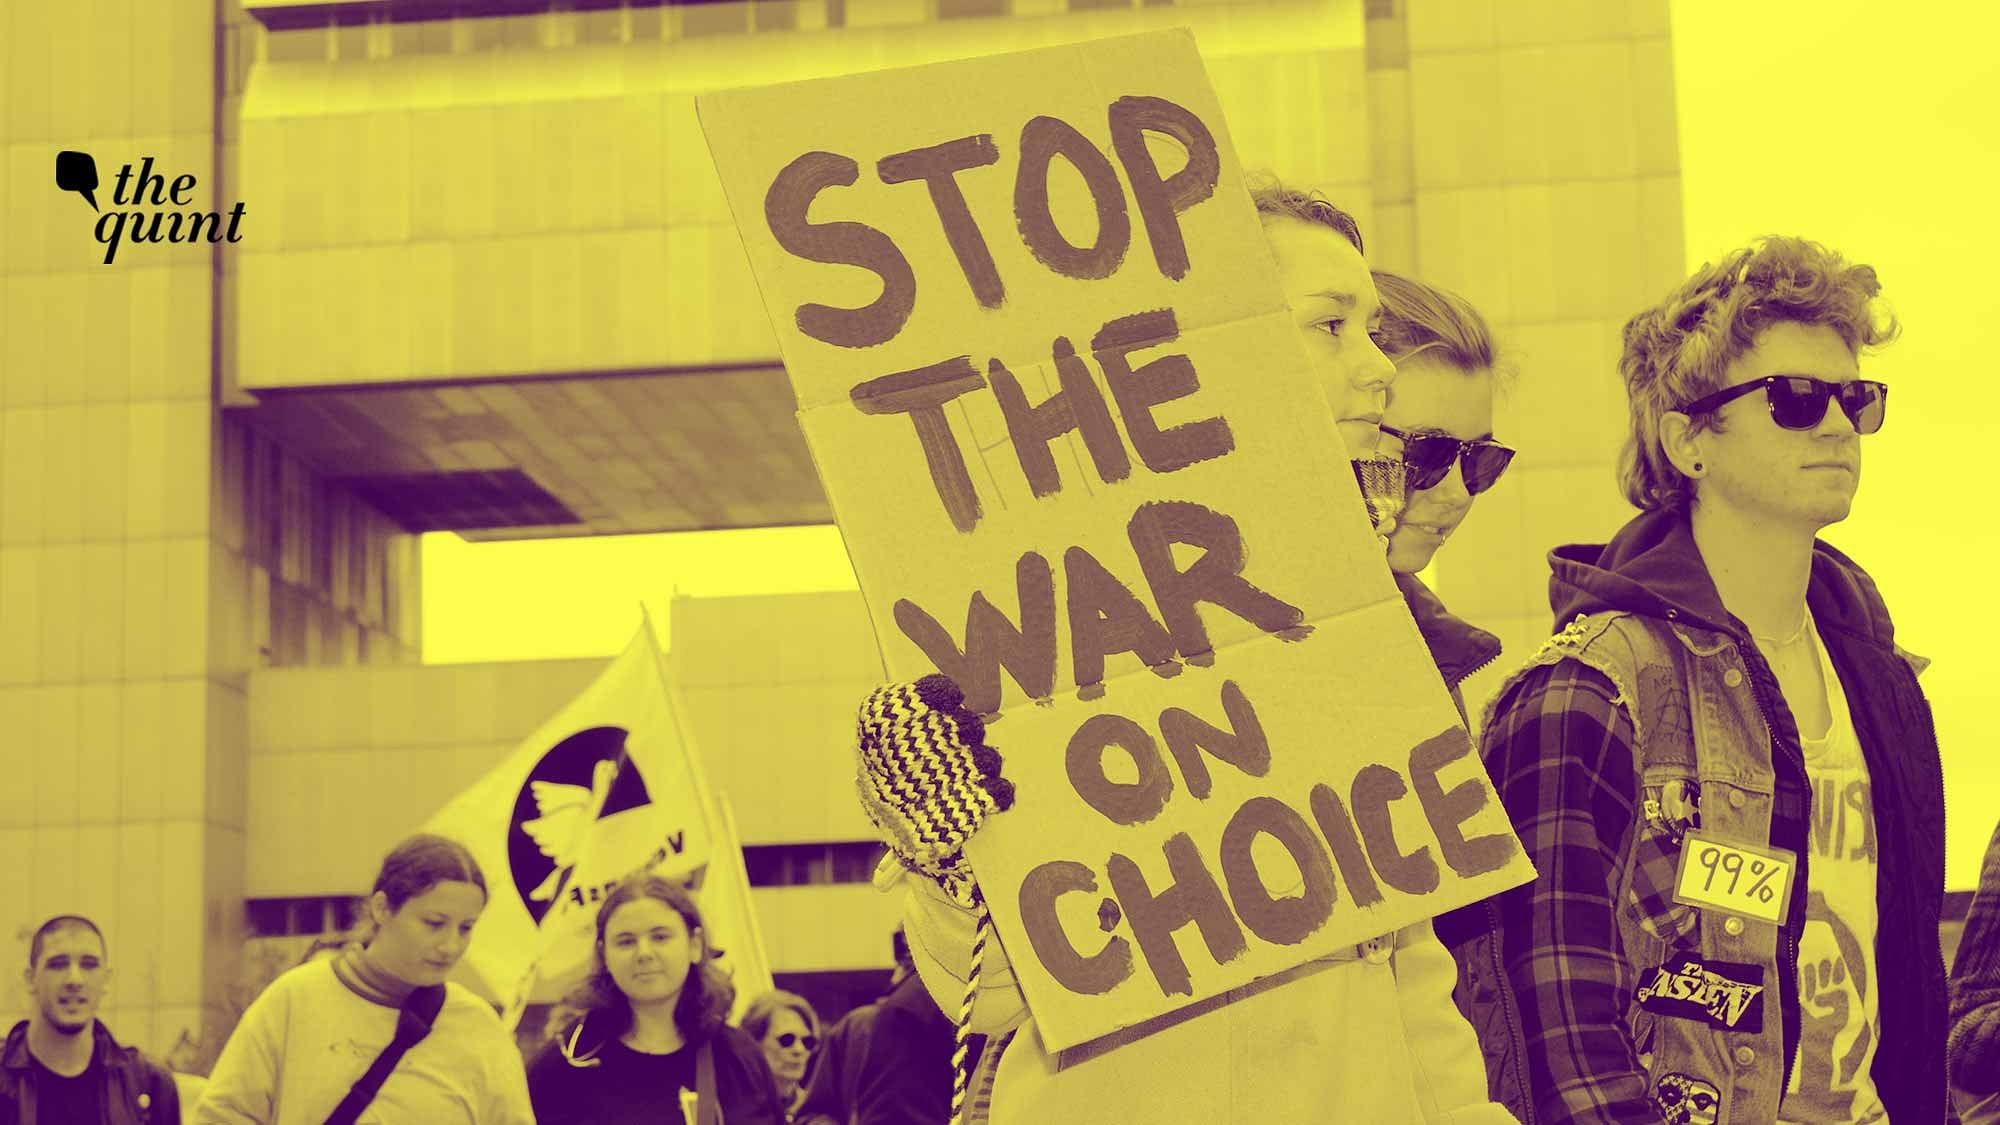 Pro-choice protest image used for representational purposes.